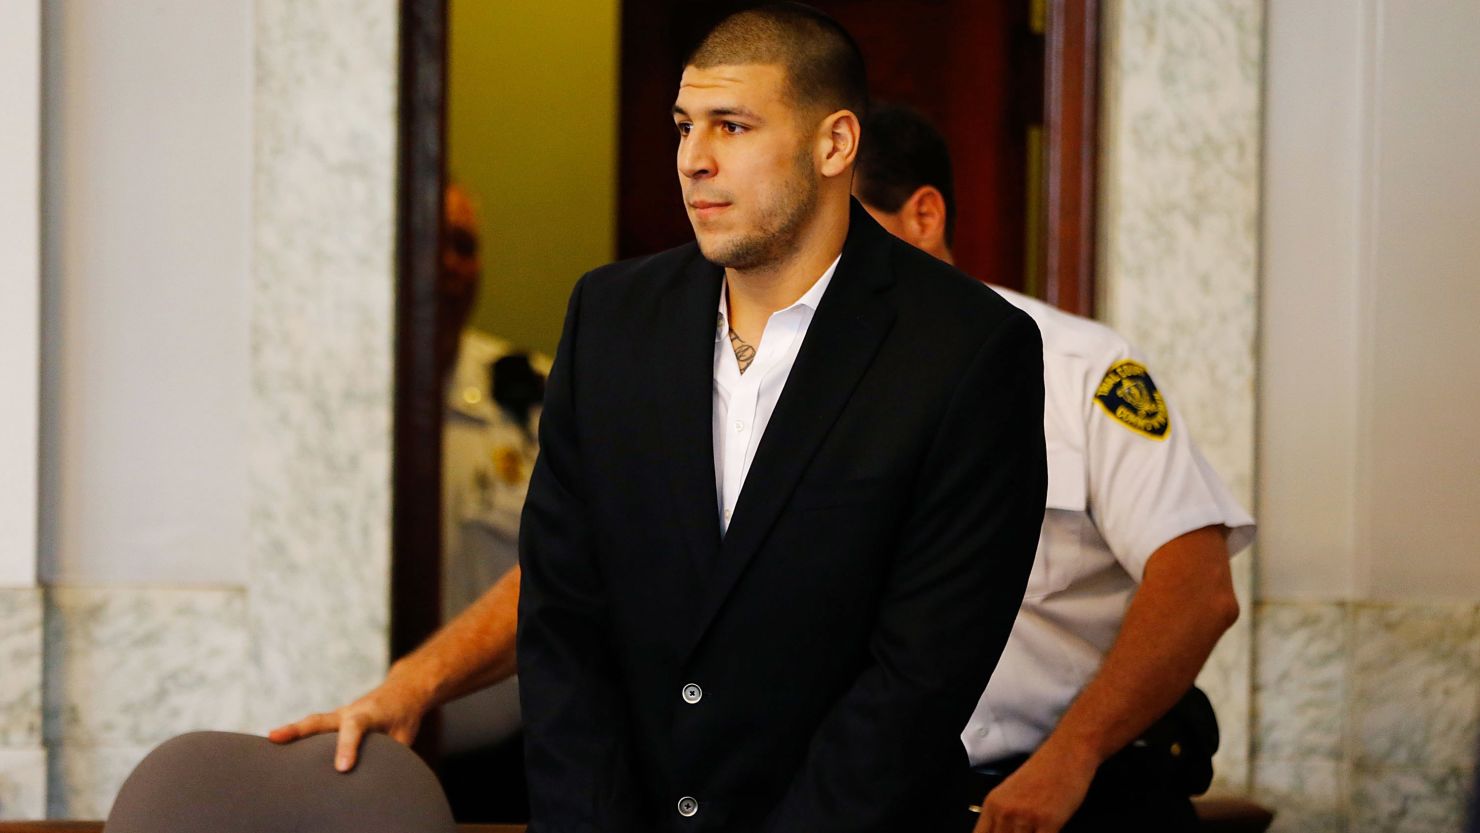 Aaron Hernandez is escorted into a courtroom in 2013.